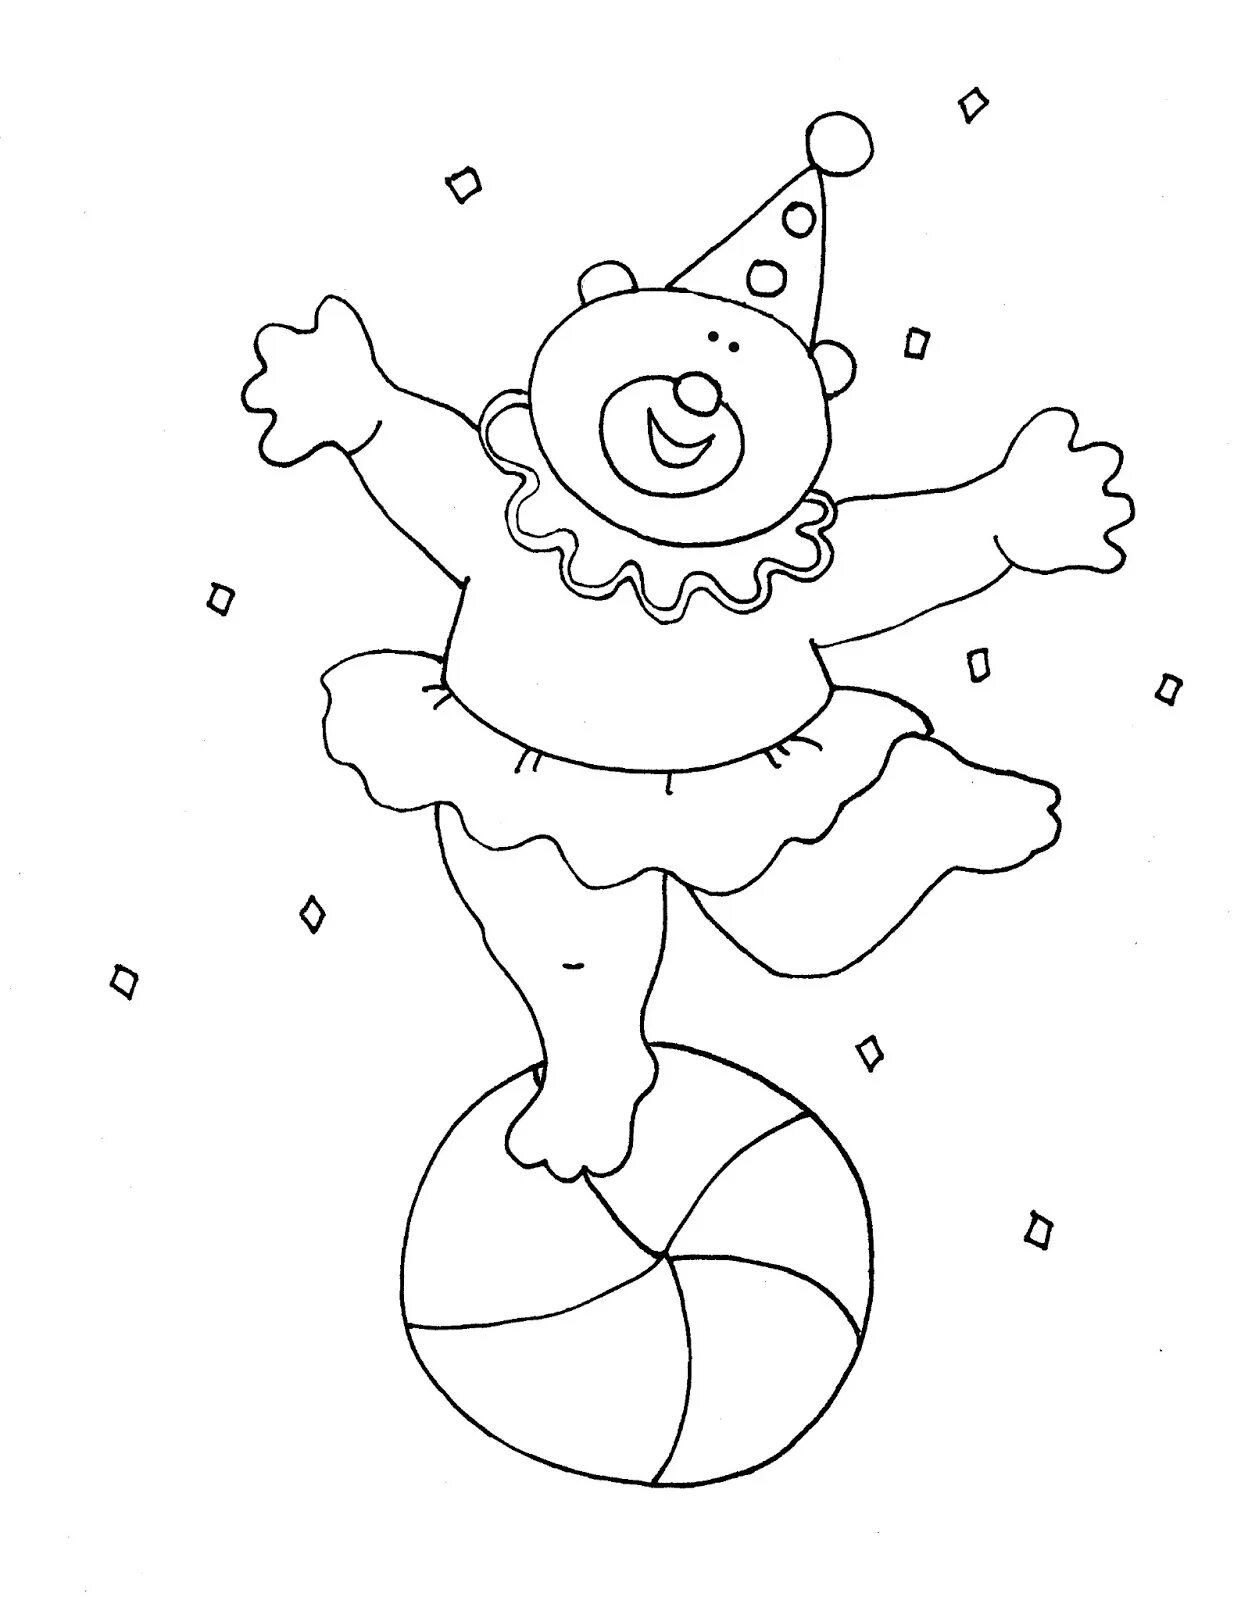 Merry circus coloring for kids